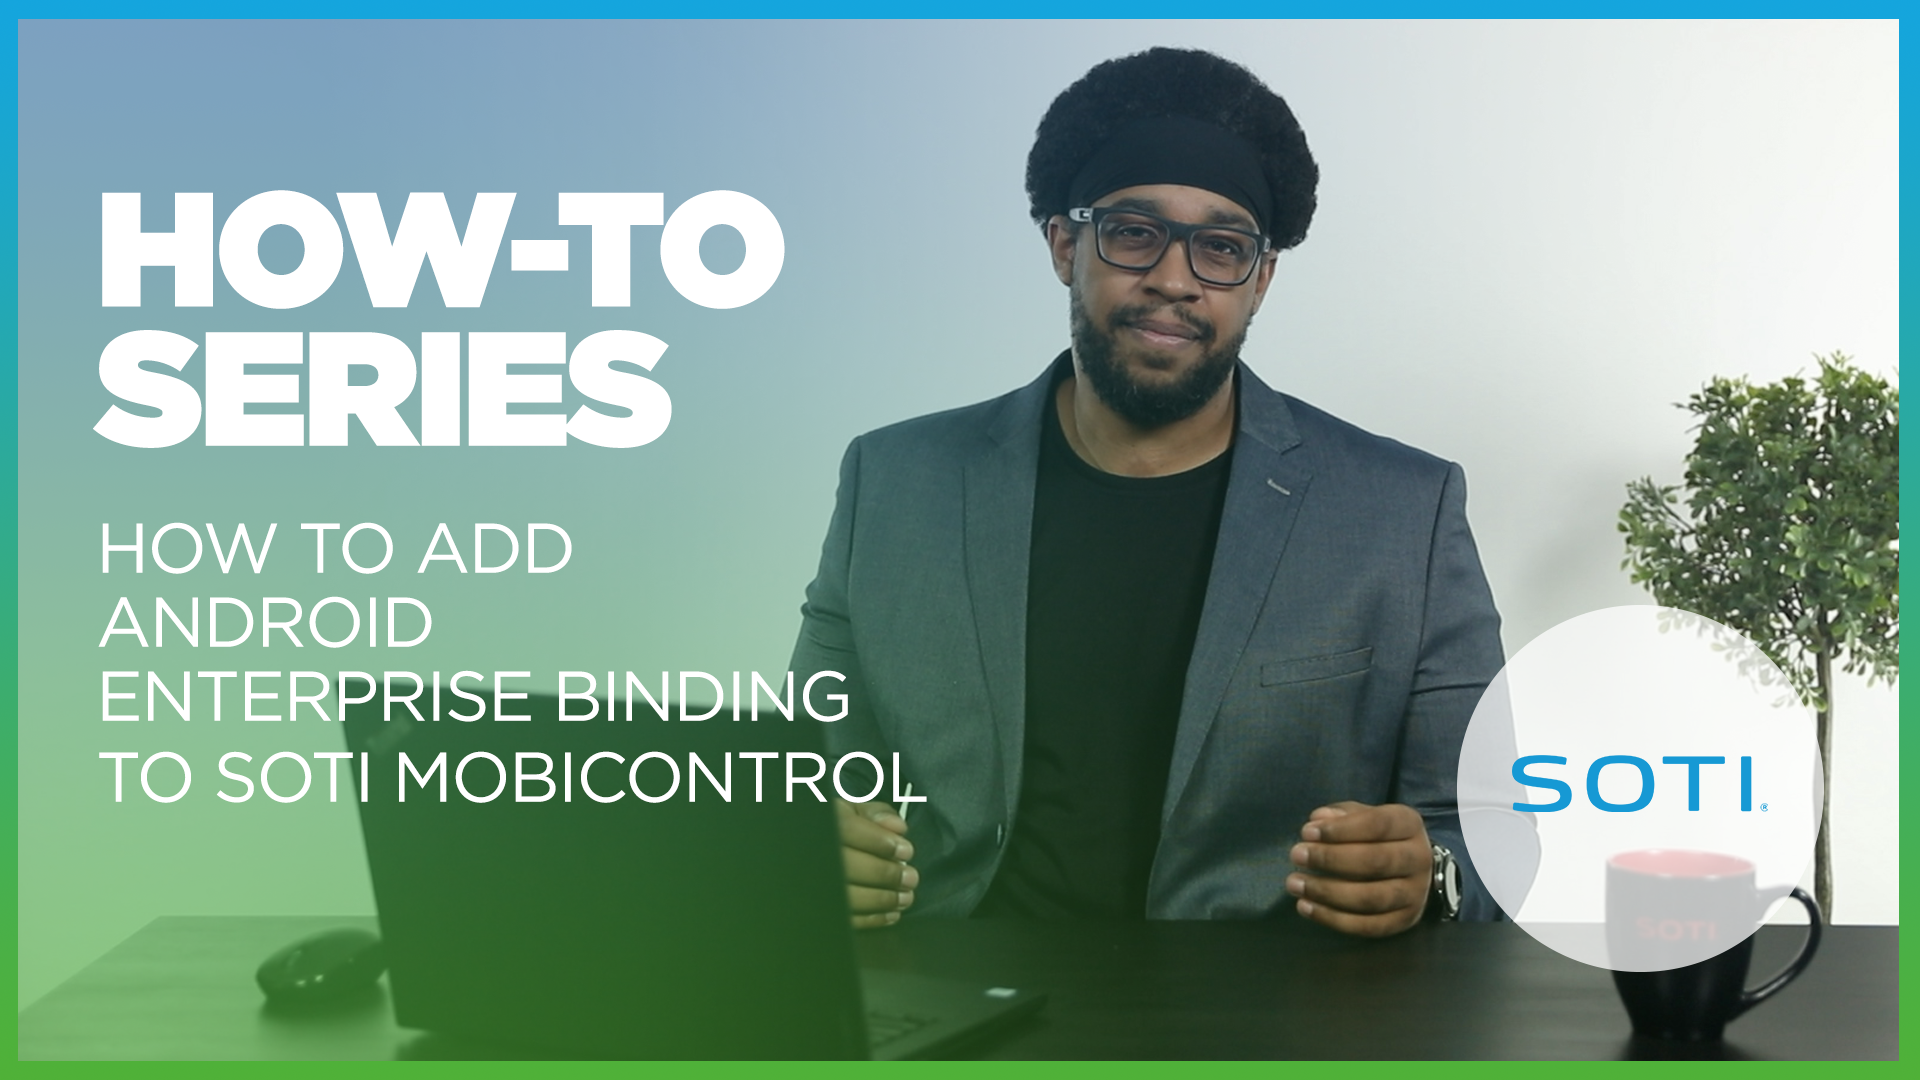 How-To: Add Android Enterprise Binding to SOTI MobiControl